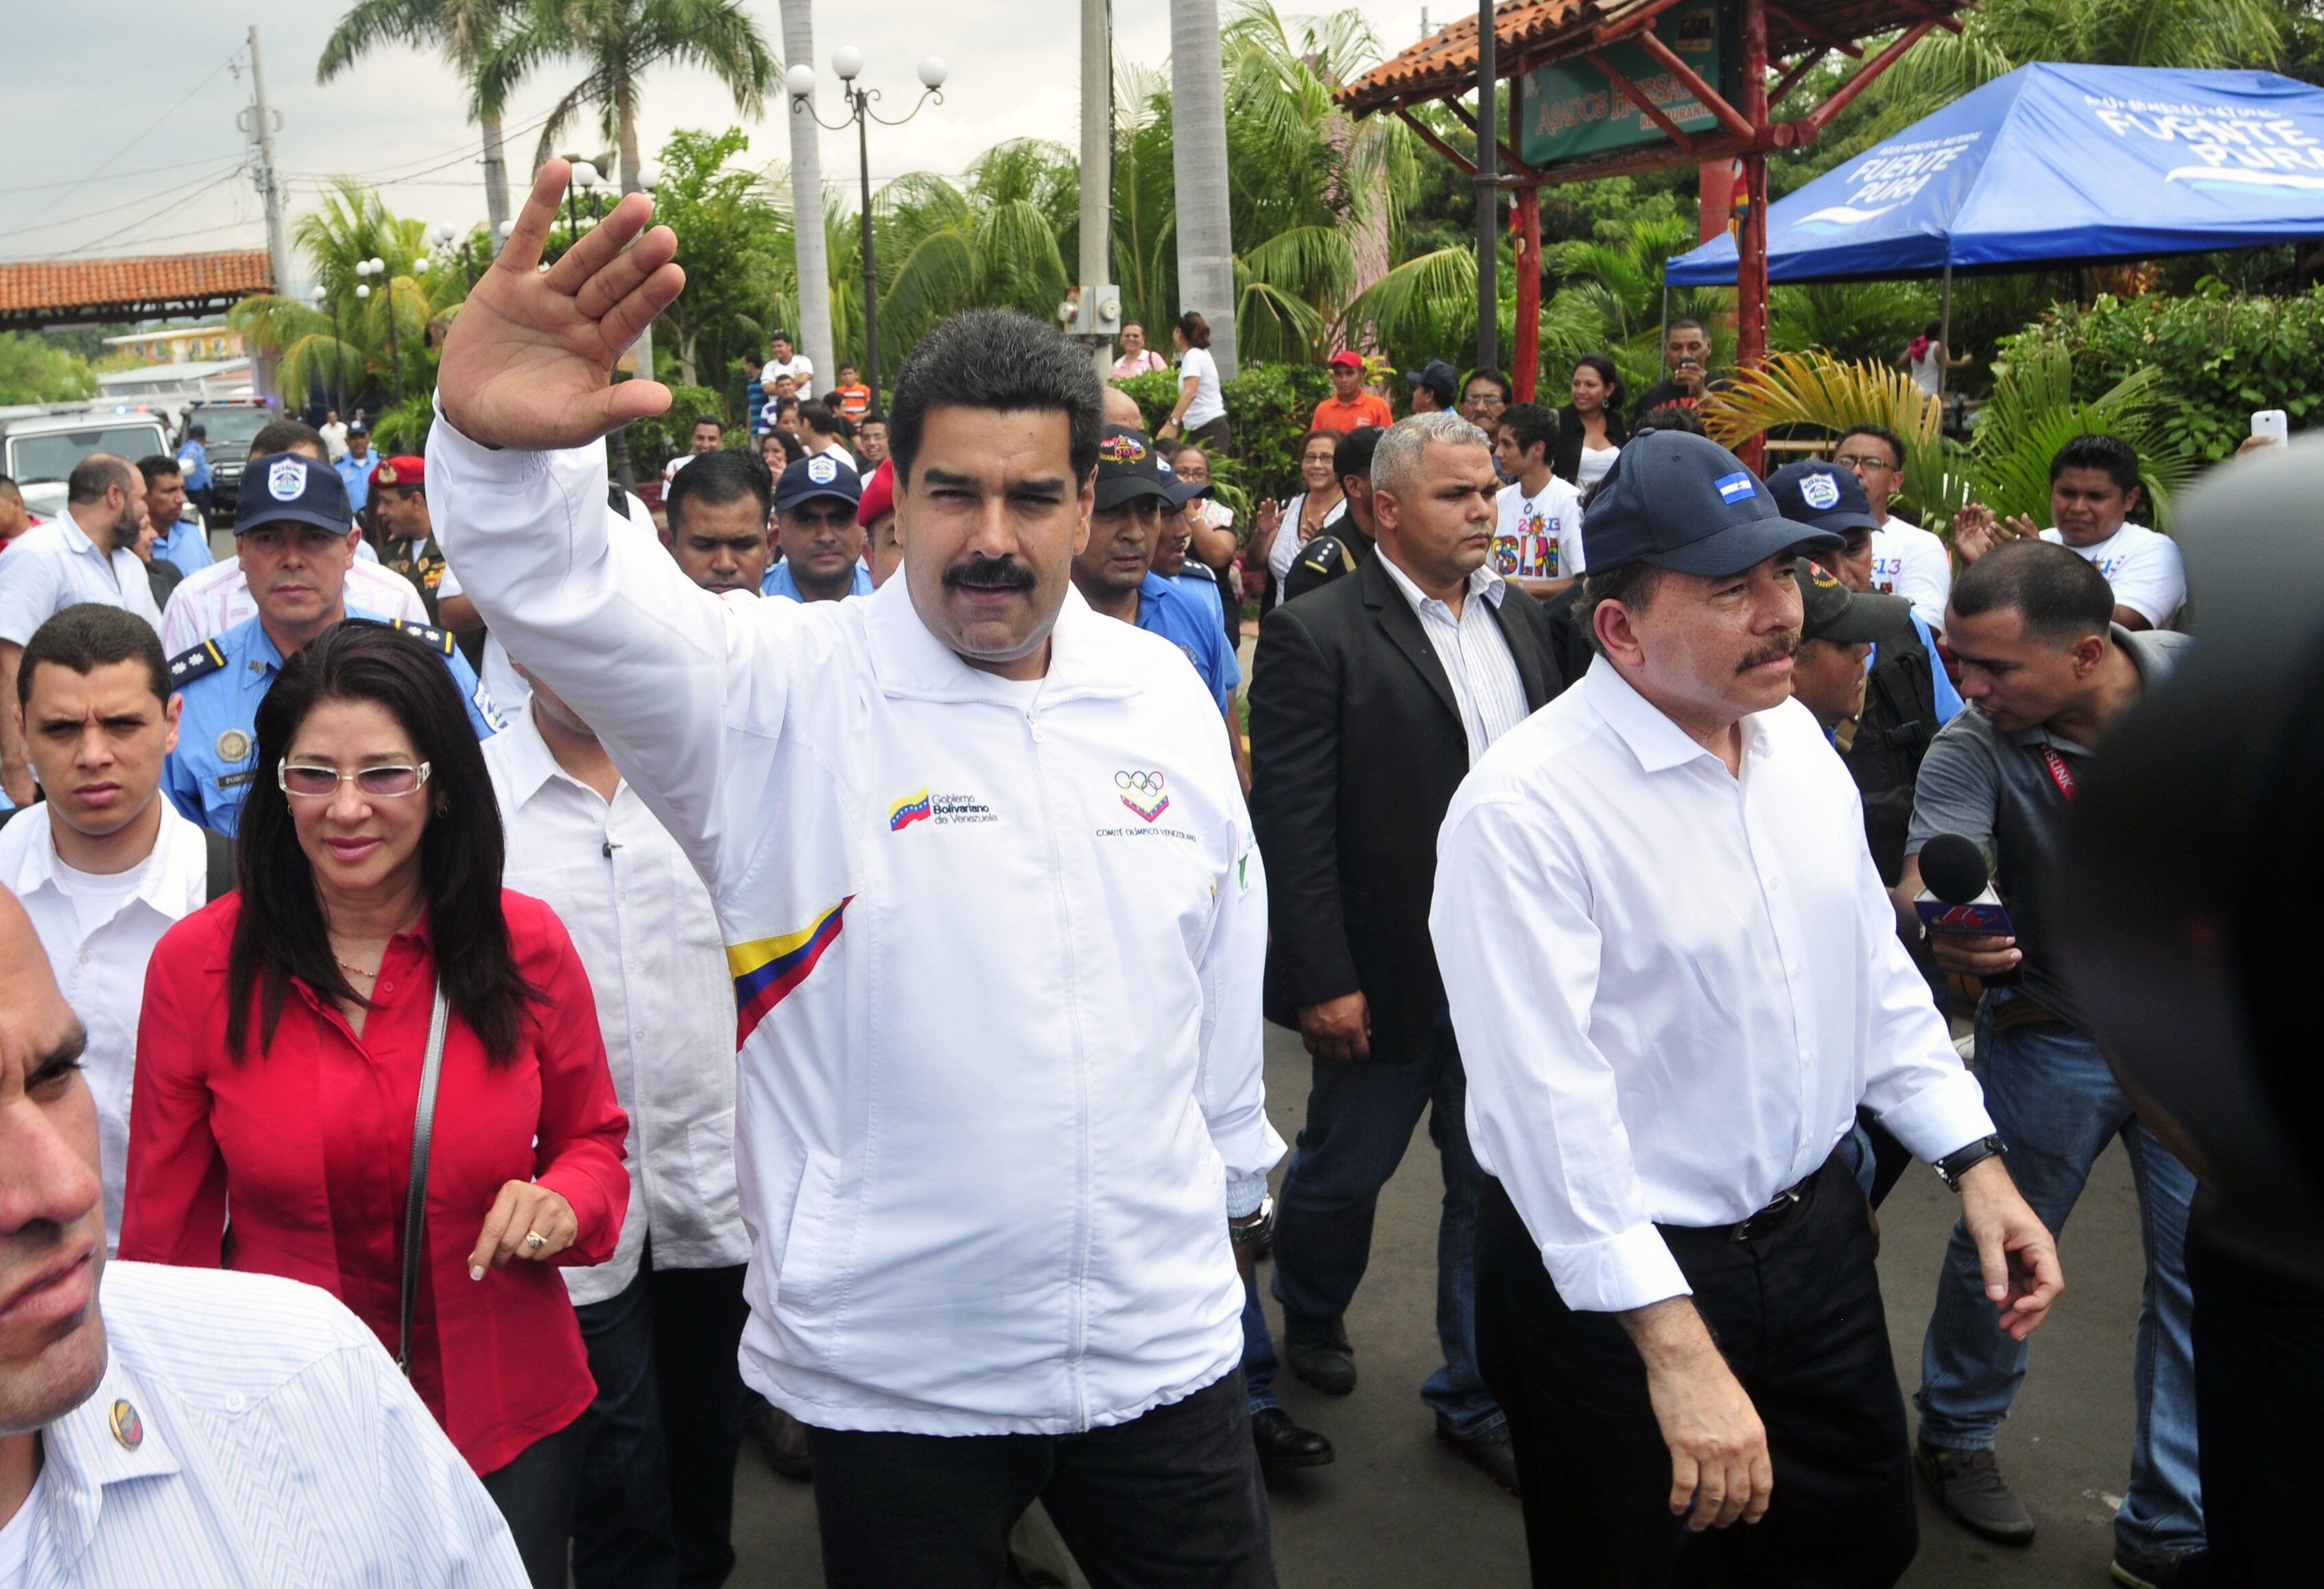 In this photo from 2013, Nicolás Maduro visits Daniel Ortega in Managua.  Both continue to perpetuate themselves in power.  EFE/Mario Lopez